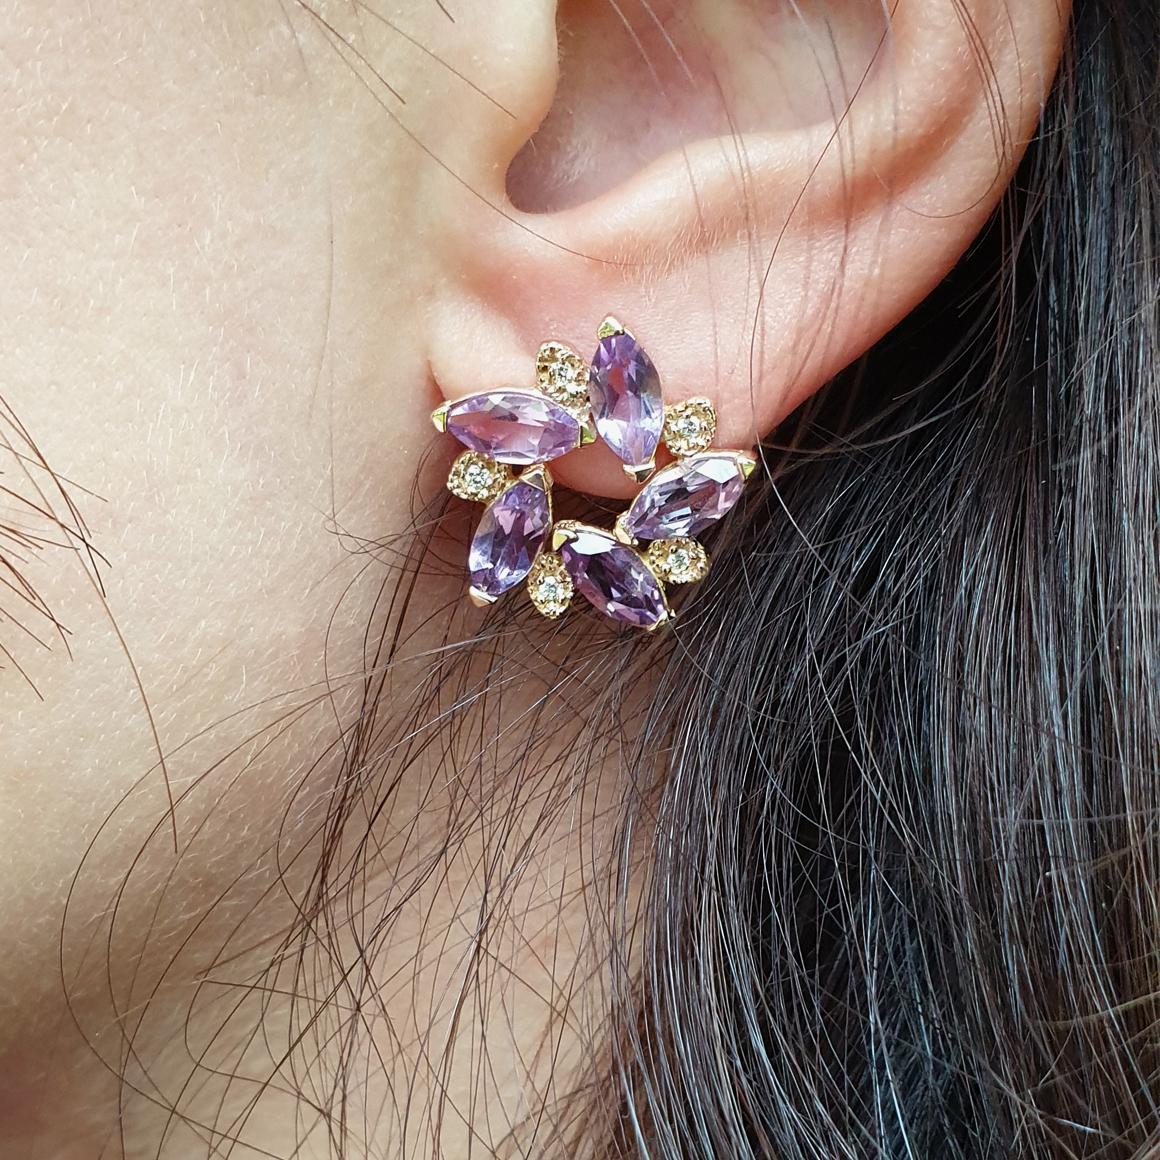 Sunflower collection, sophisticated designs with natural stones , suitaible for any occasion.
Made in Italy by Stanoppi Jewellery since 1948
Earrings in 18k rose gold with Amethyst (marquise cut, size: 4x6 mm) and white Diamonds cts 0.06 VS colour